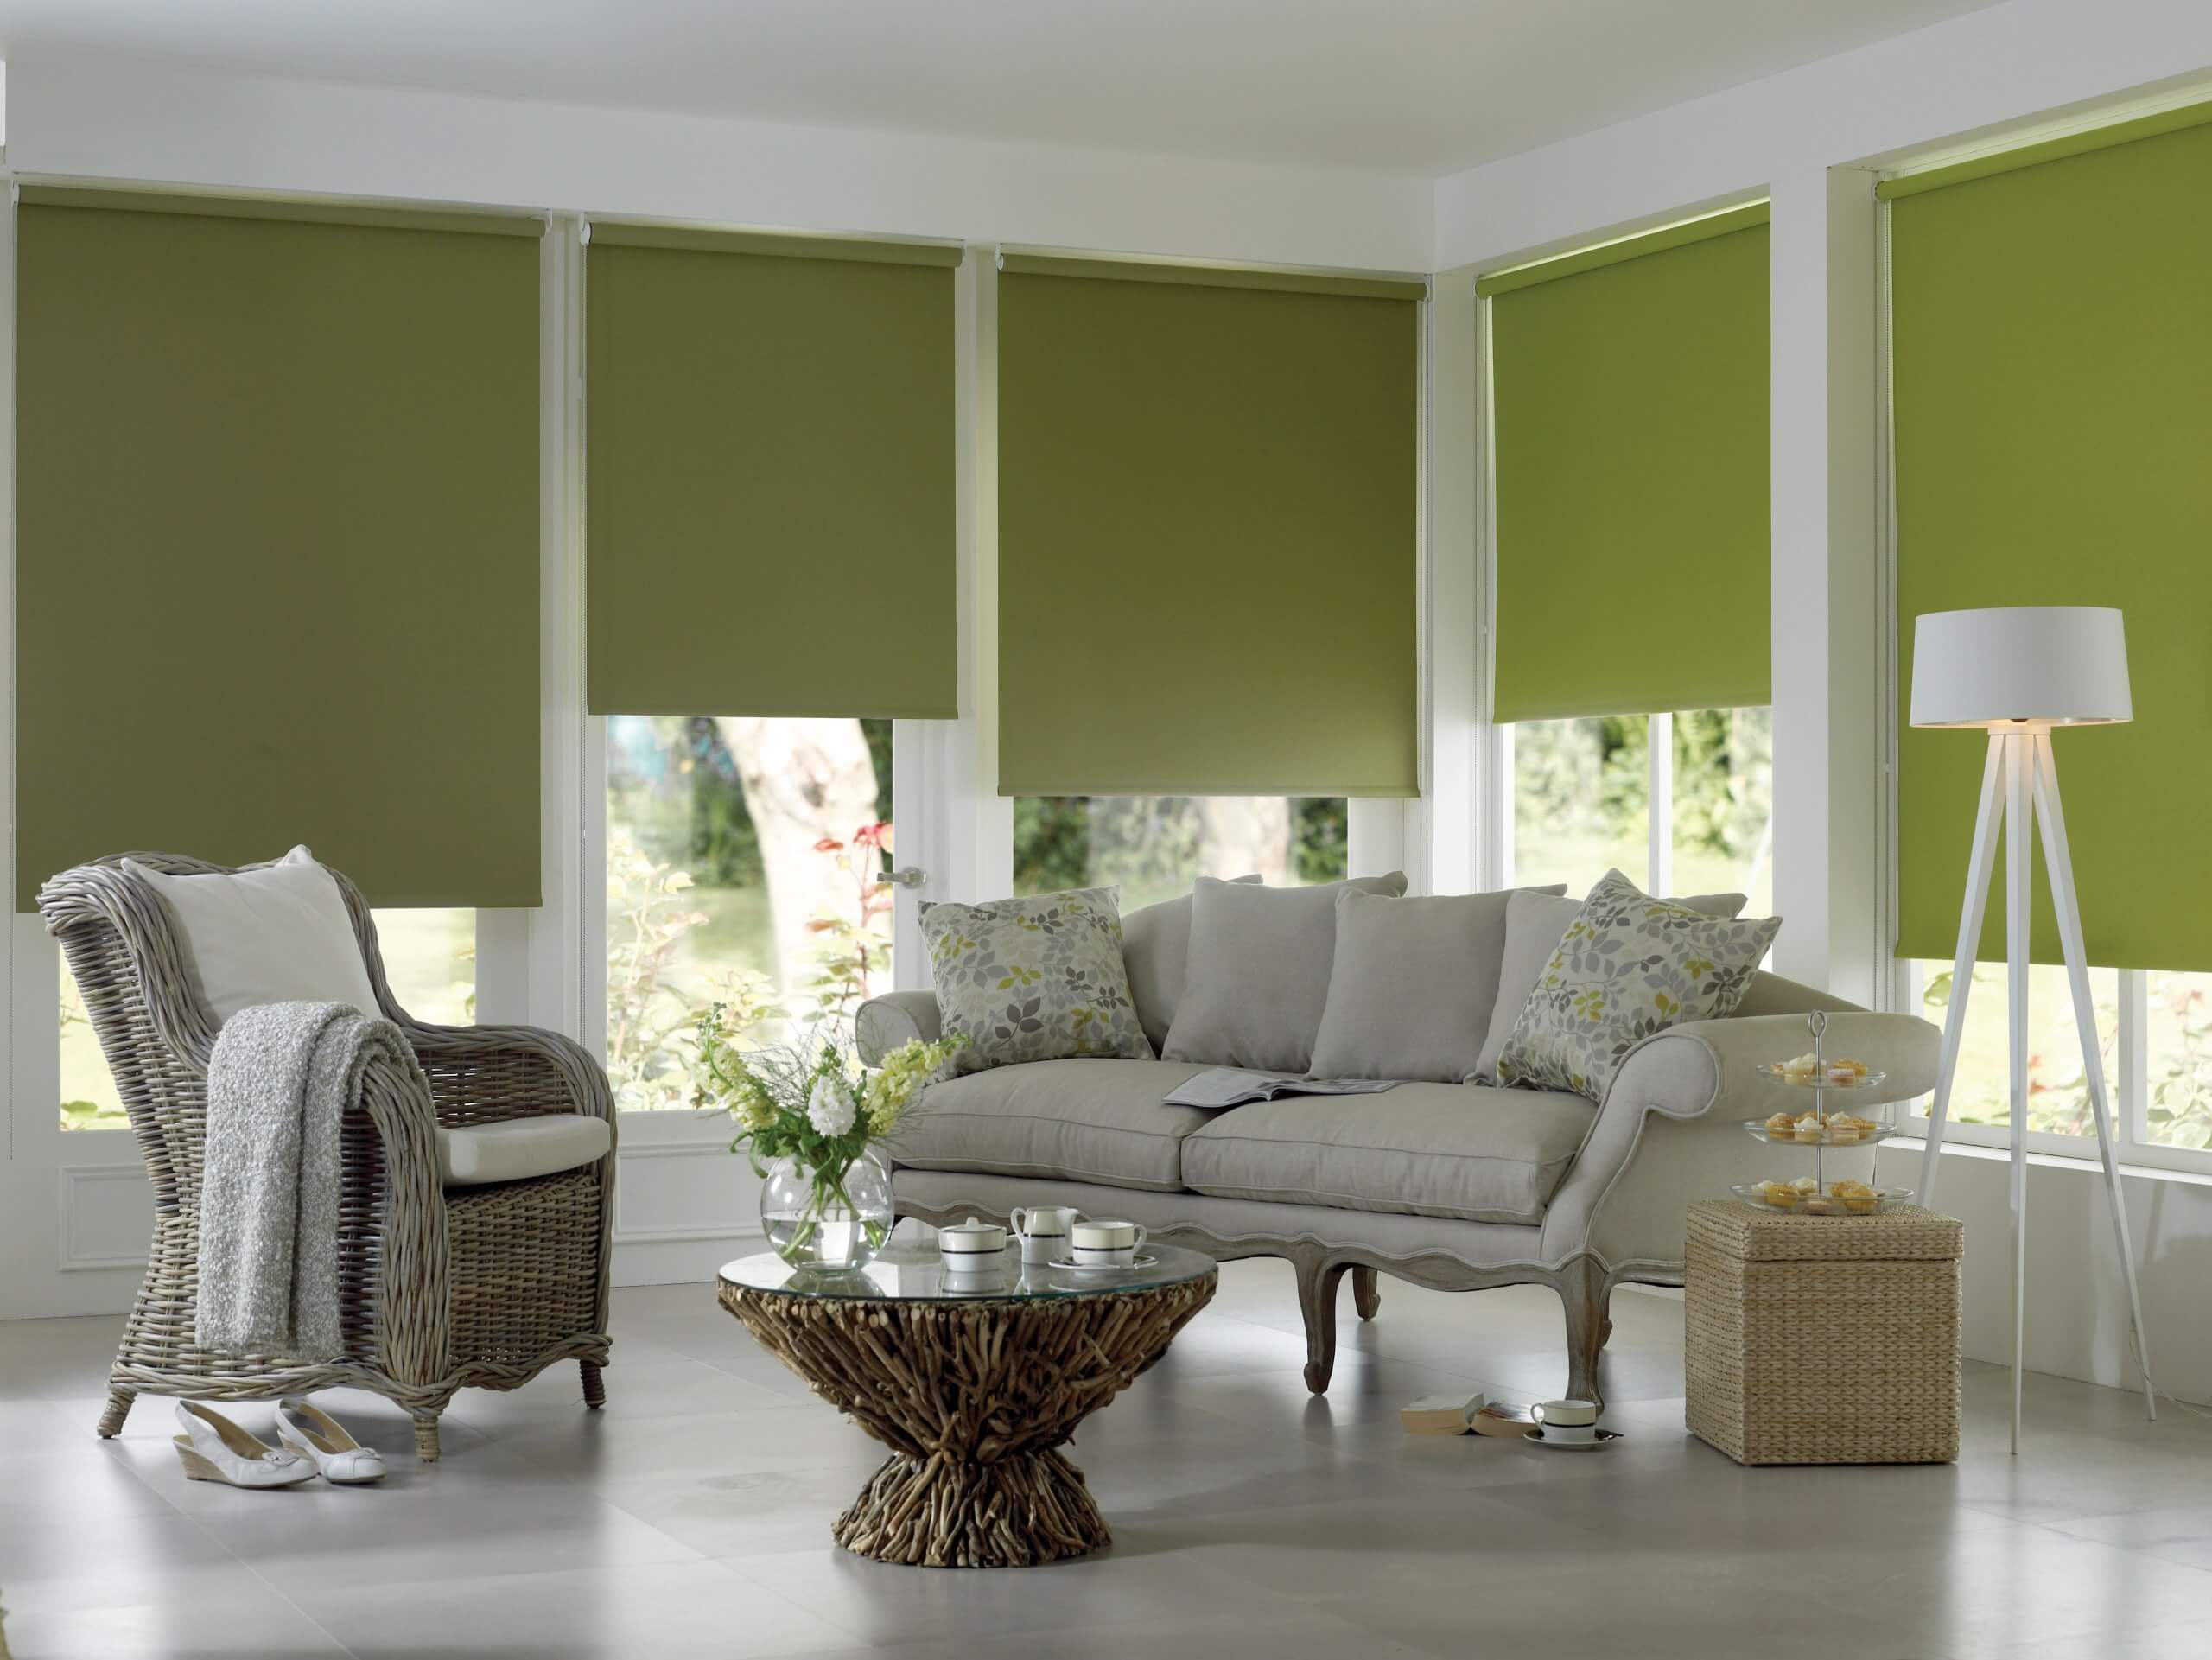 HERE COMES THE SUN – THE BENEFITS OF BLOCKOUT BLINDS, CURTAINS AND FABRICS.